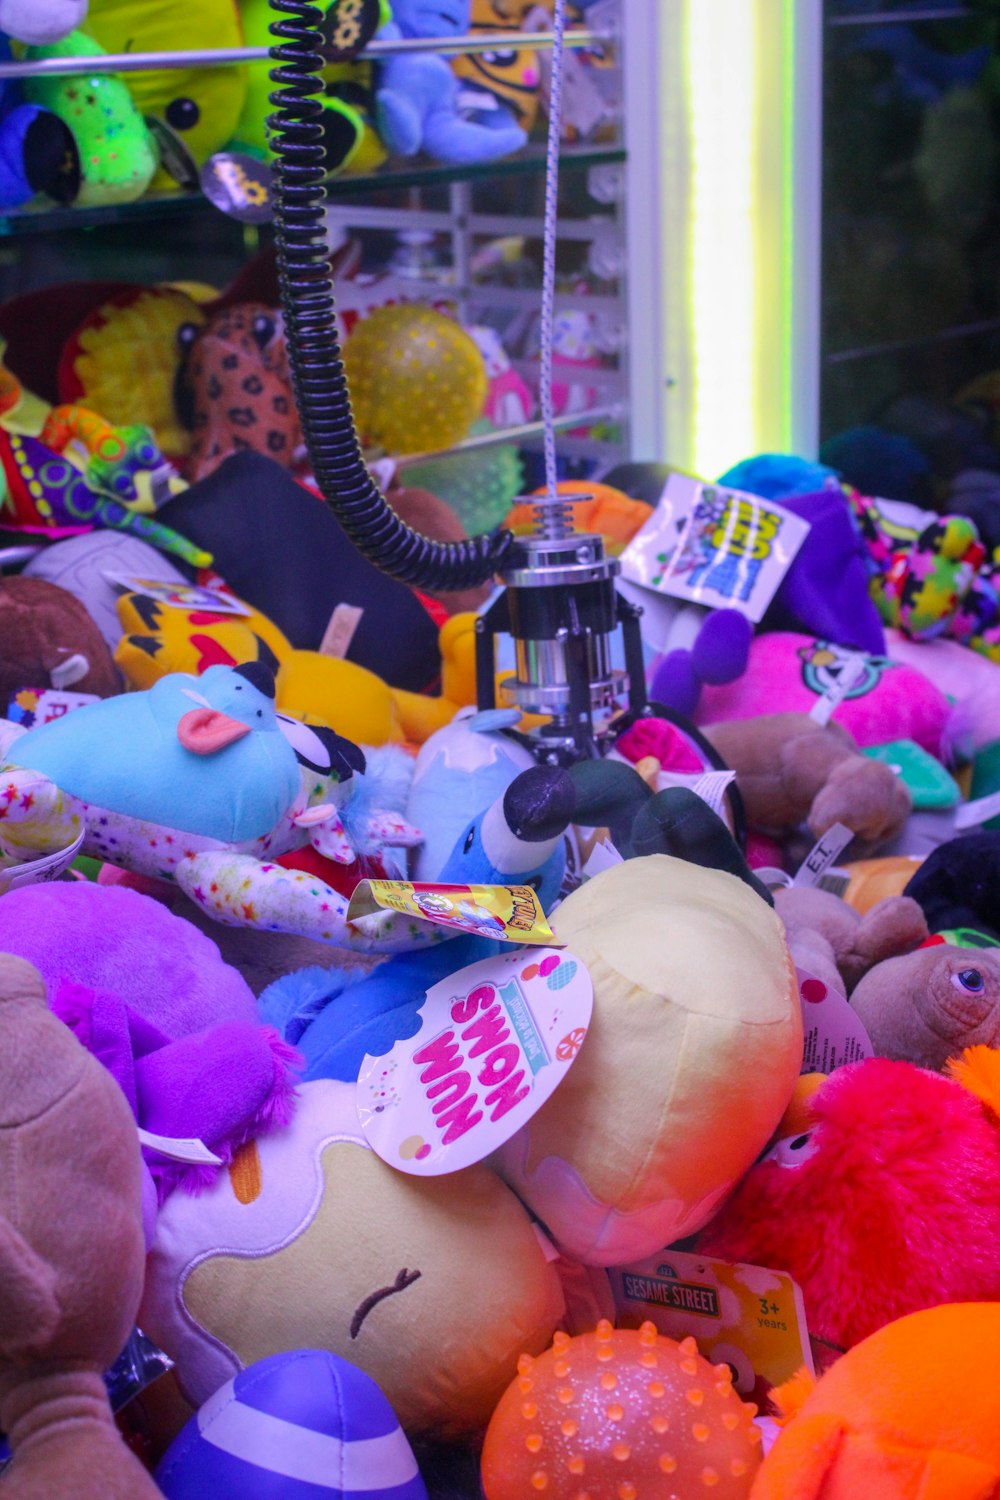 a pile of stuffed animals sitting next to a lamp